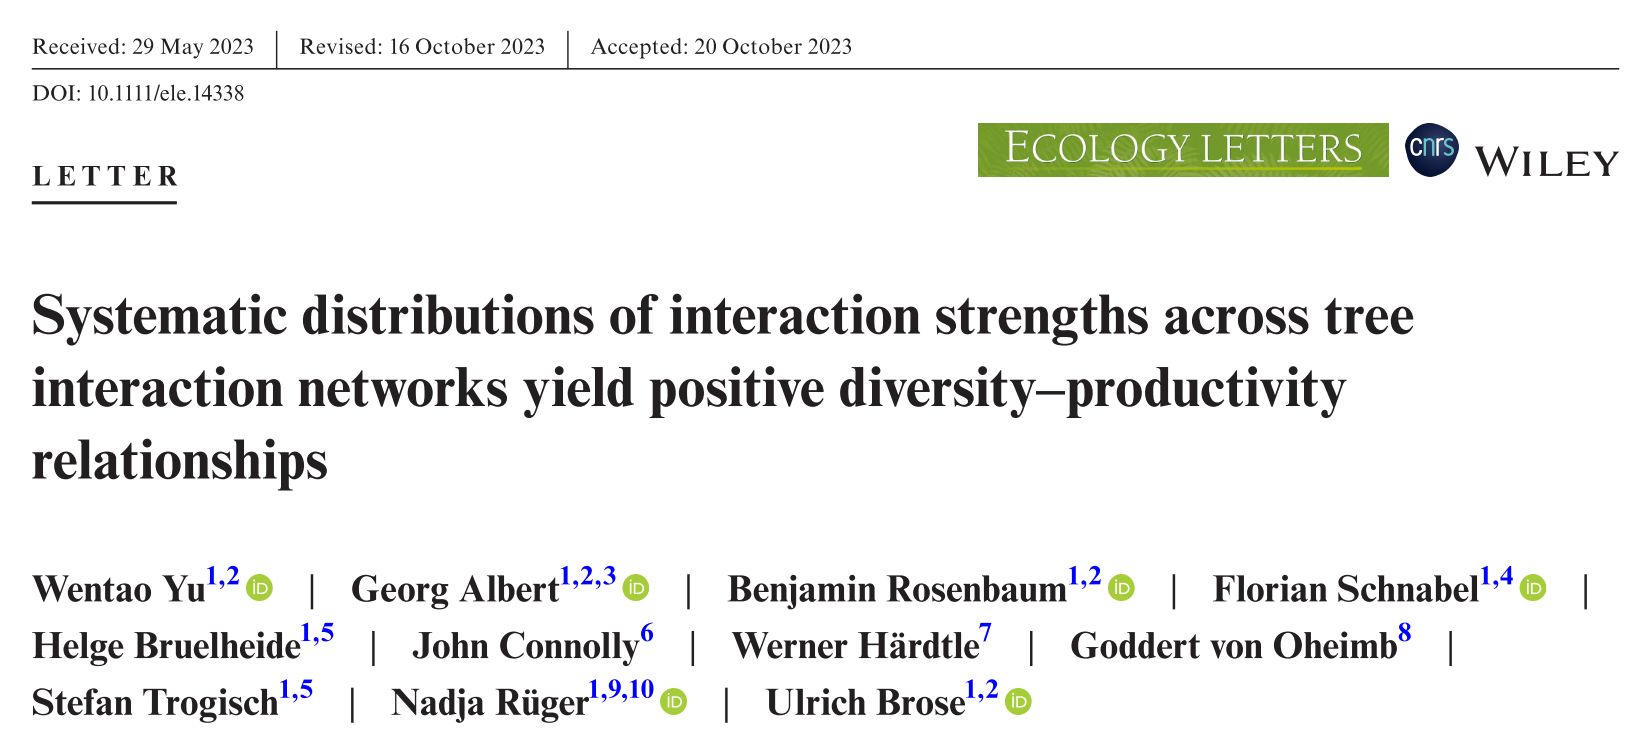 Systematic distributions of interaction strengths across tree interaction networks yield positive diversity–productivity relationships